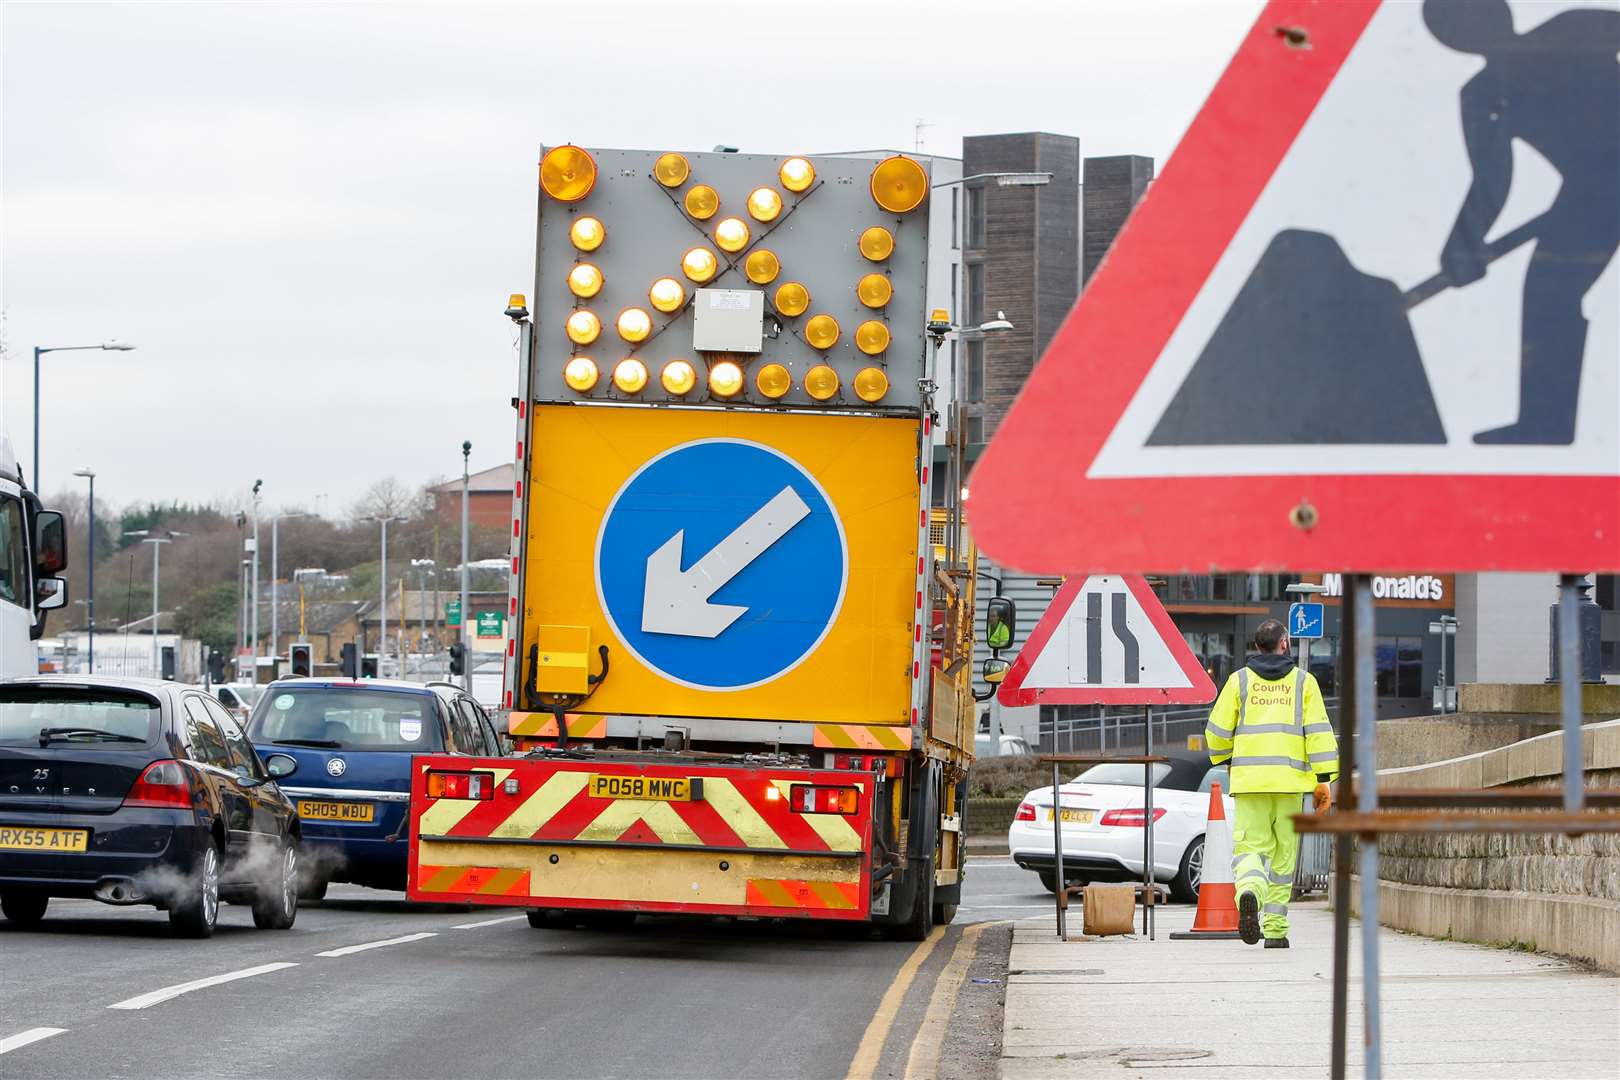 Major works are continuing on Maidstone's gyratory system